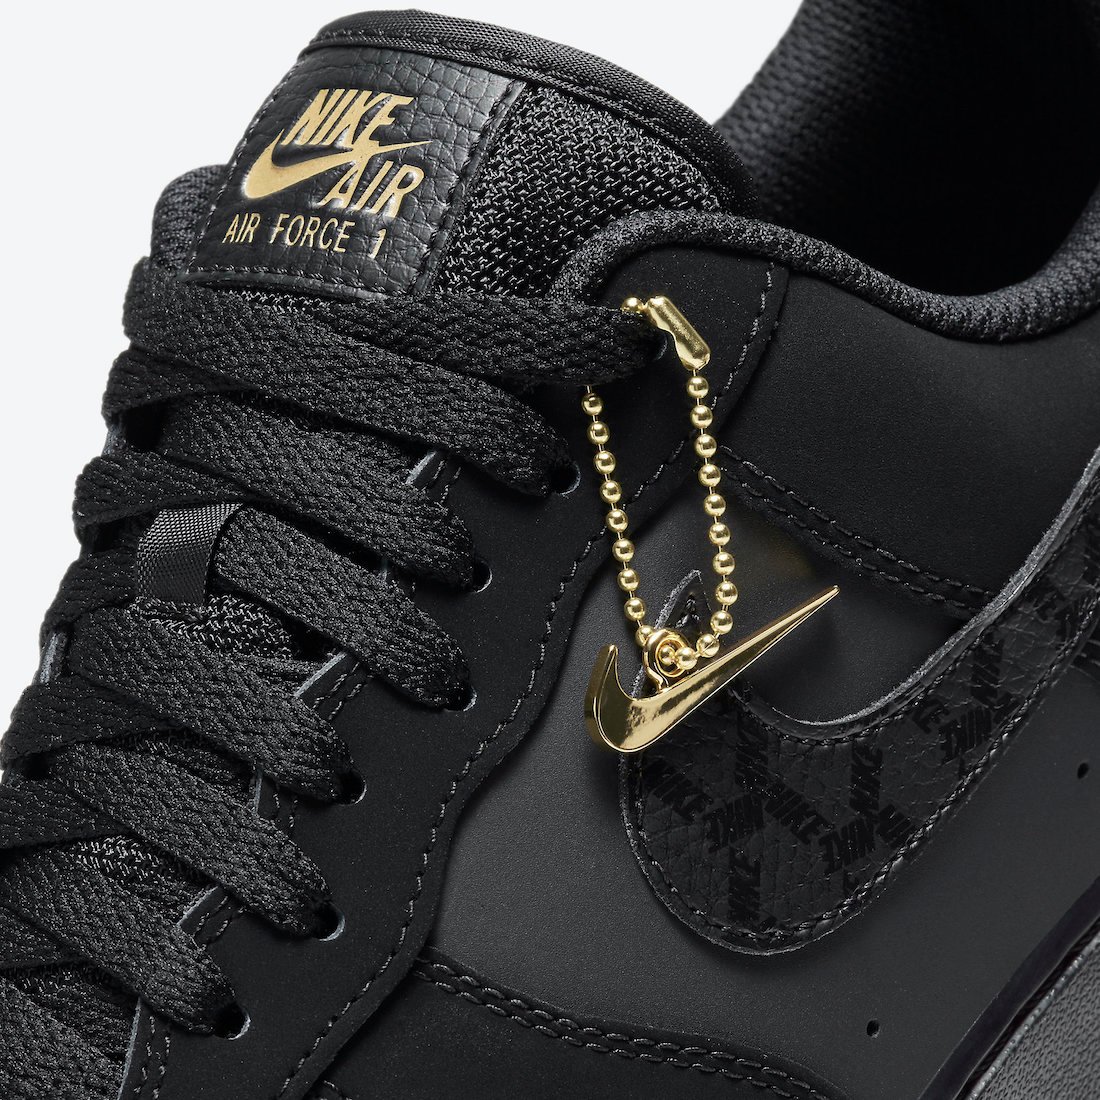 Nike Air Force 1 Low Black Gold Nubuck DH2473-001 Release Date 